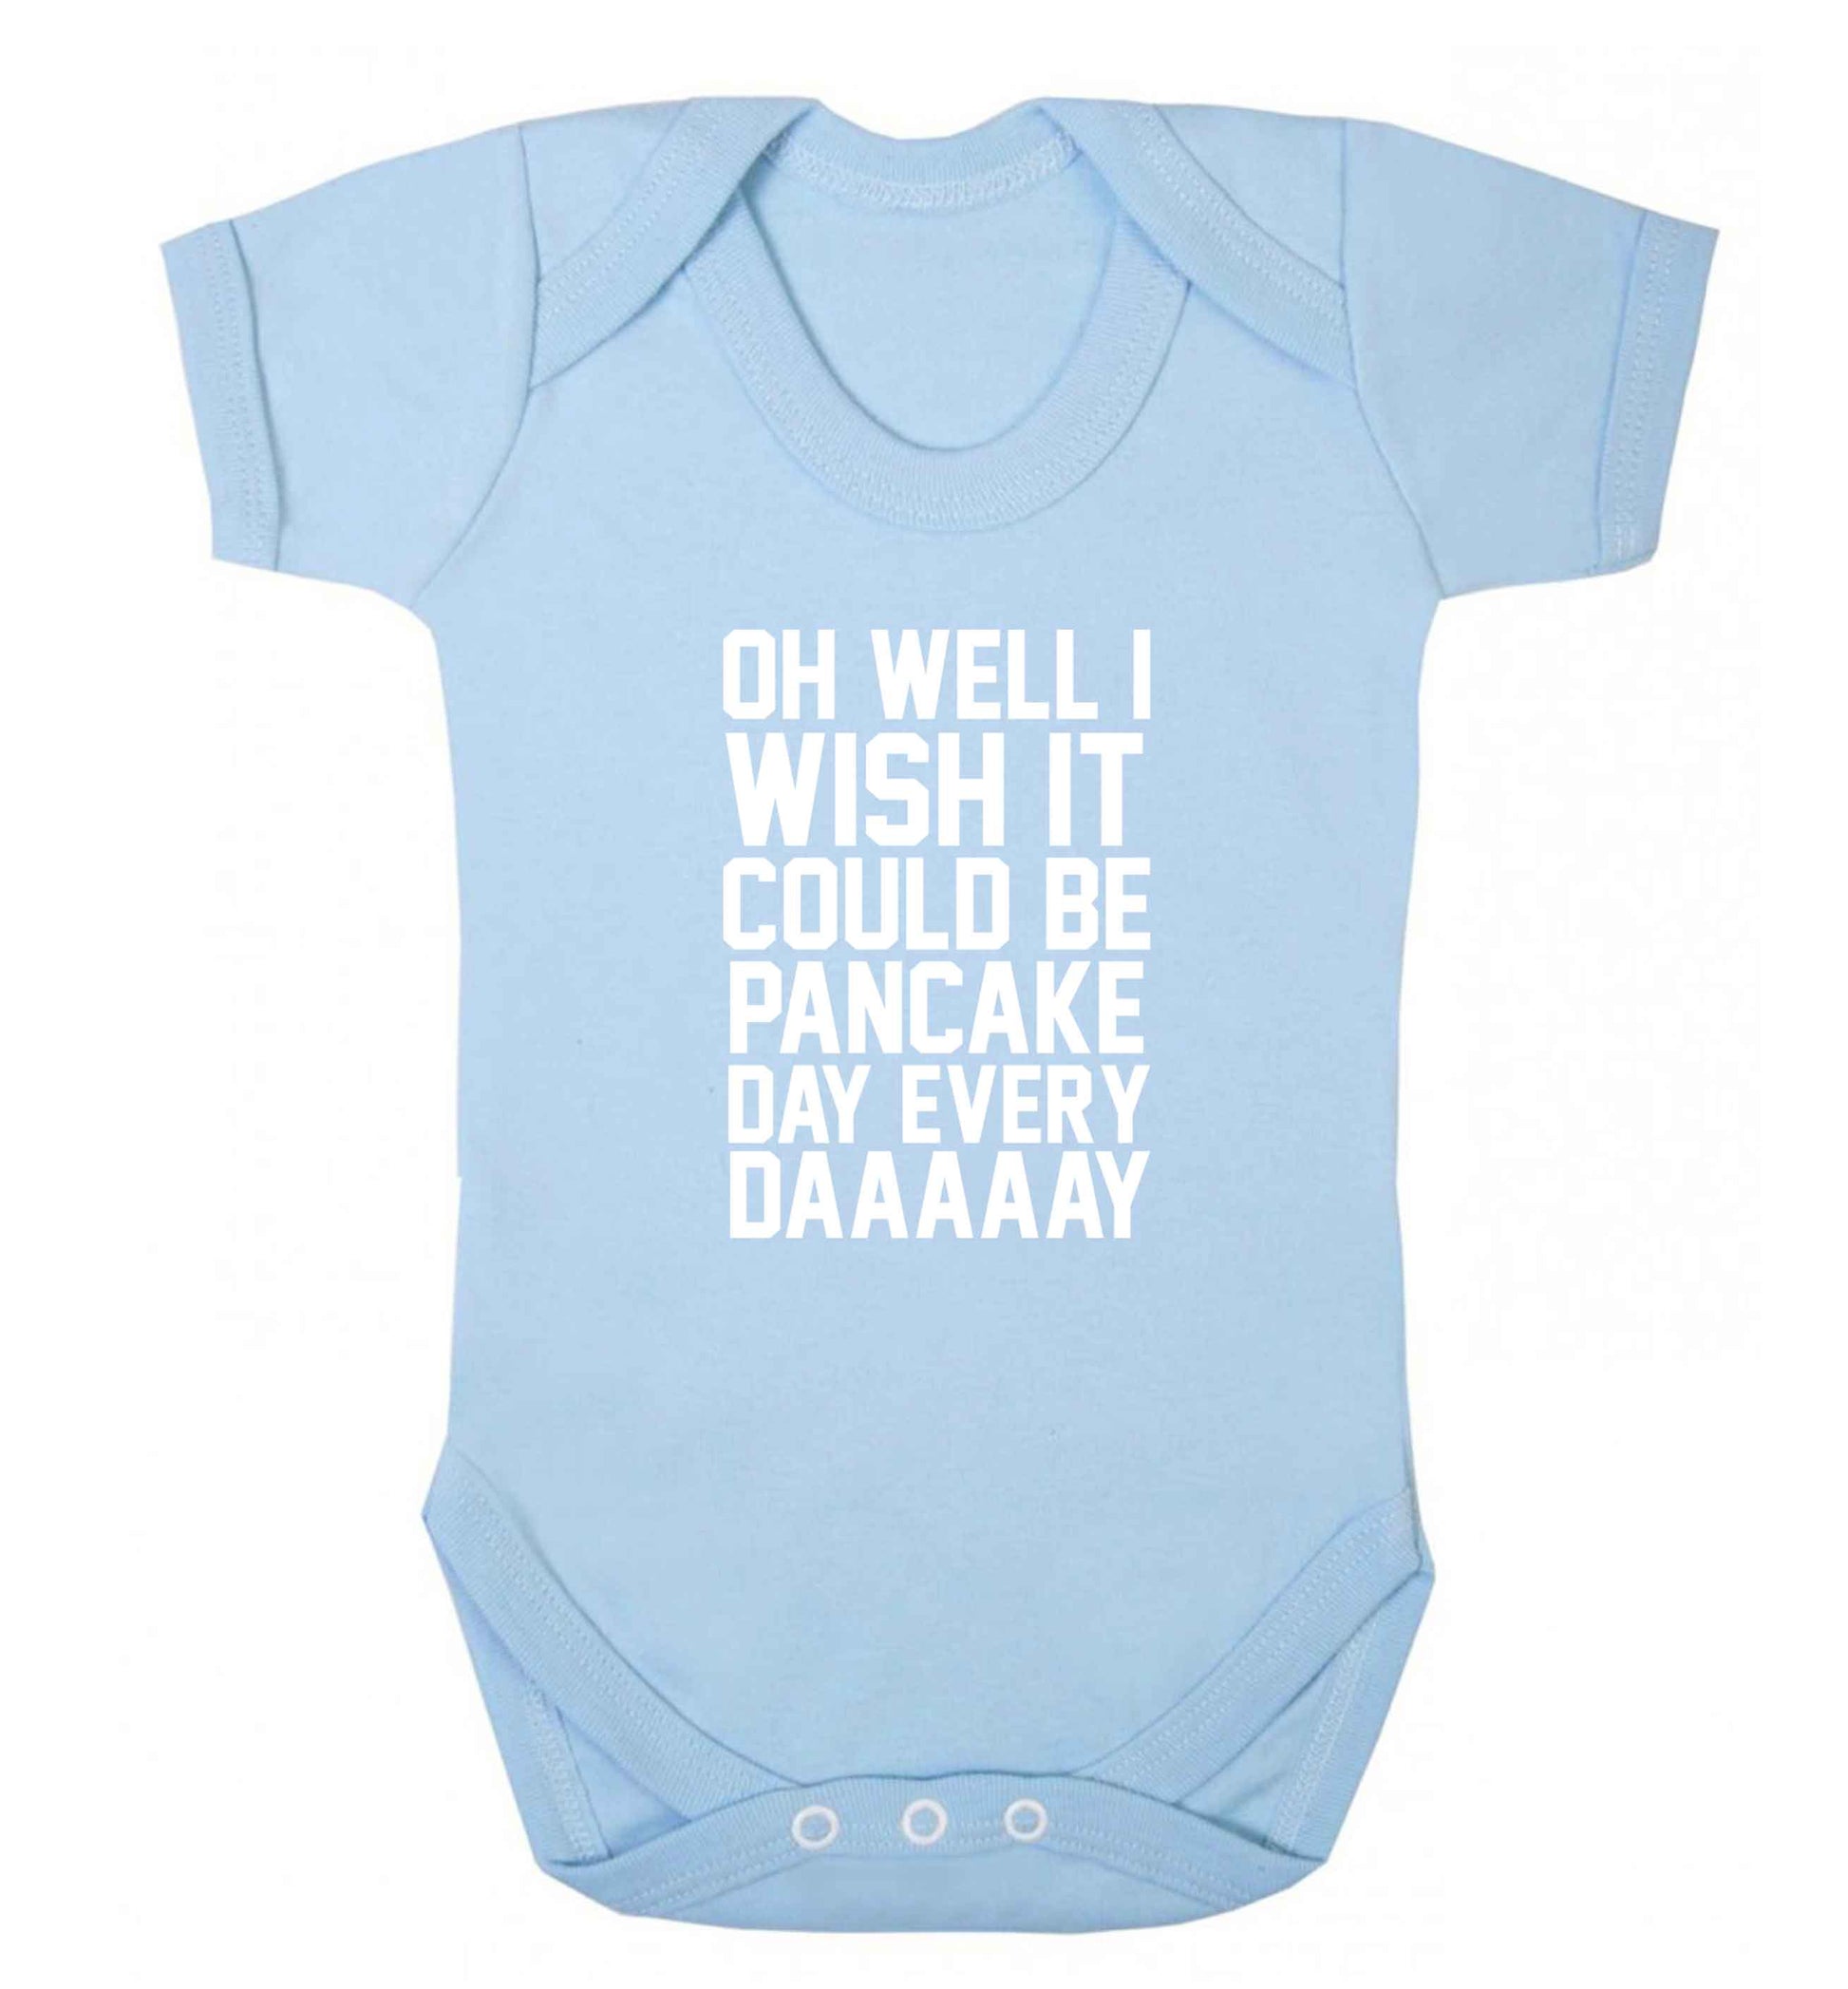 Oh well I wish it could be pancake day every day baby vest pale blue 18-24 months